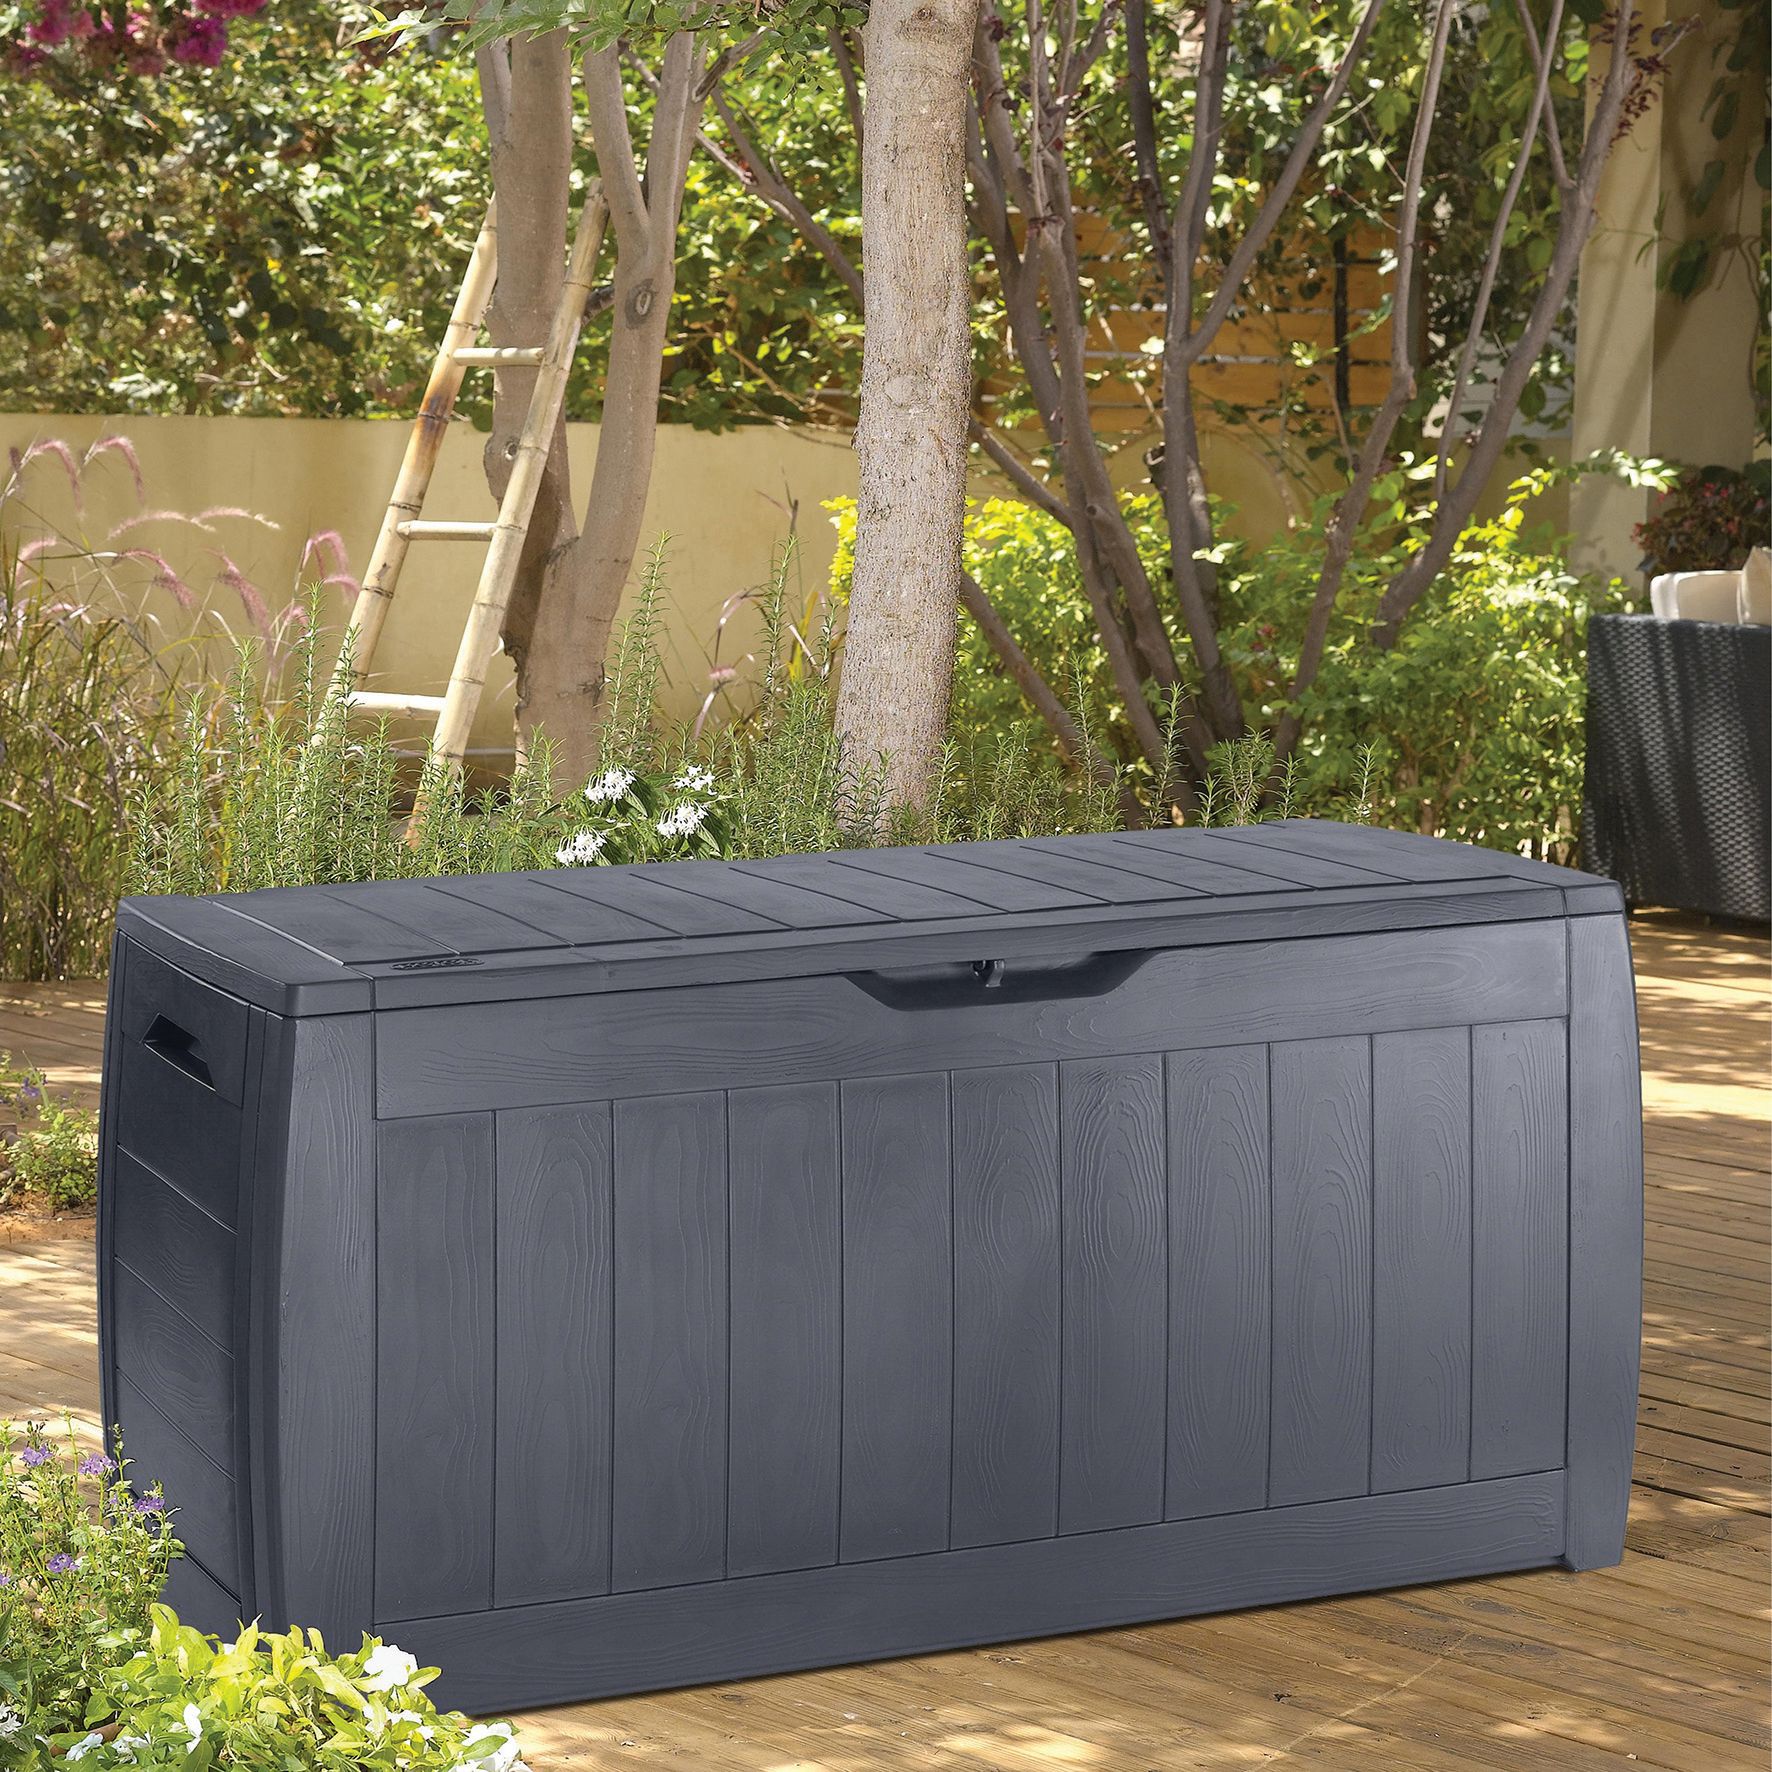 Image of Keter Hollywood Patio Storage Deck Box